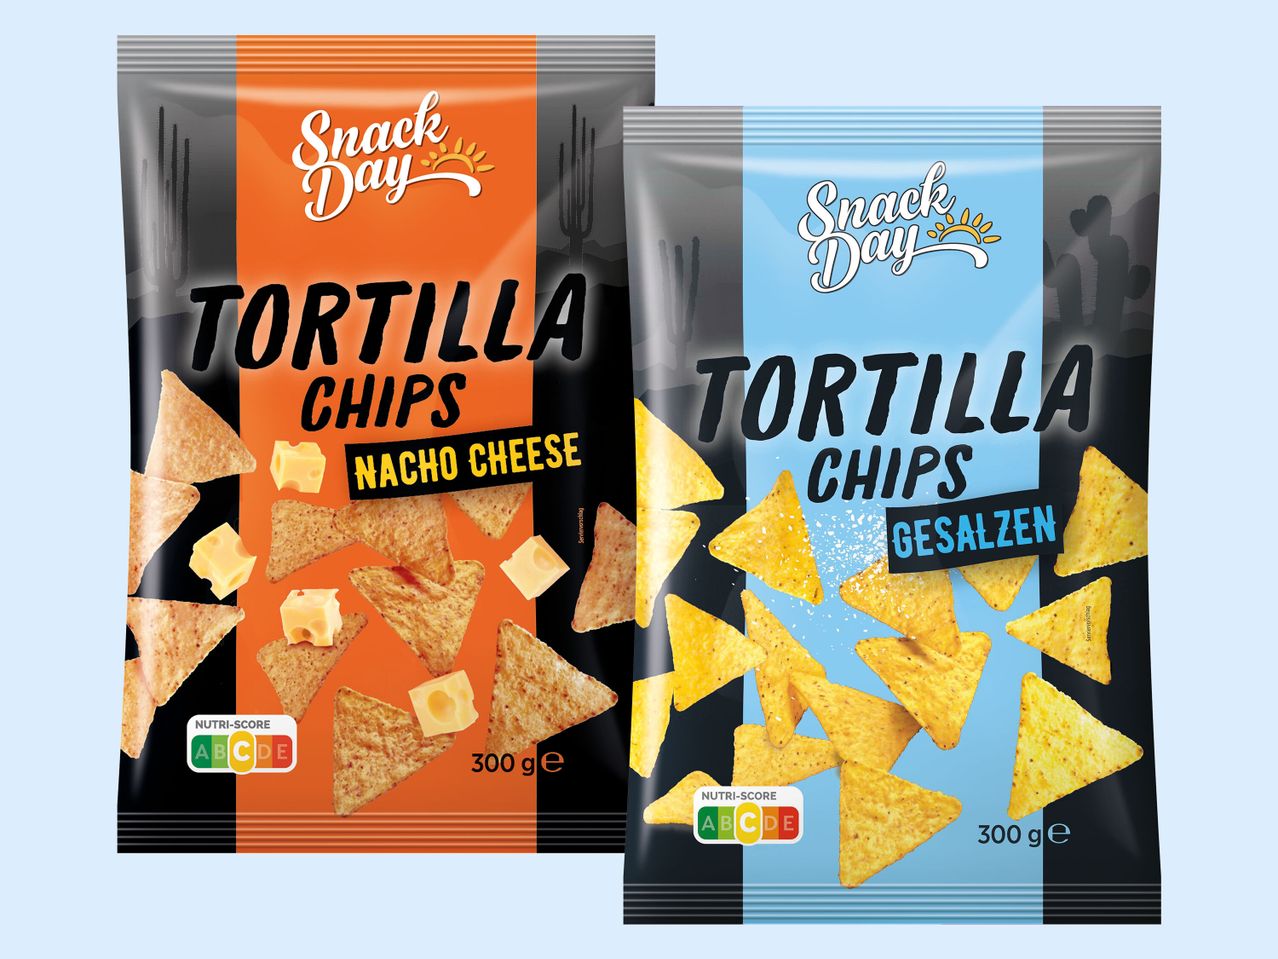 Snack Day Chips Tortilla